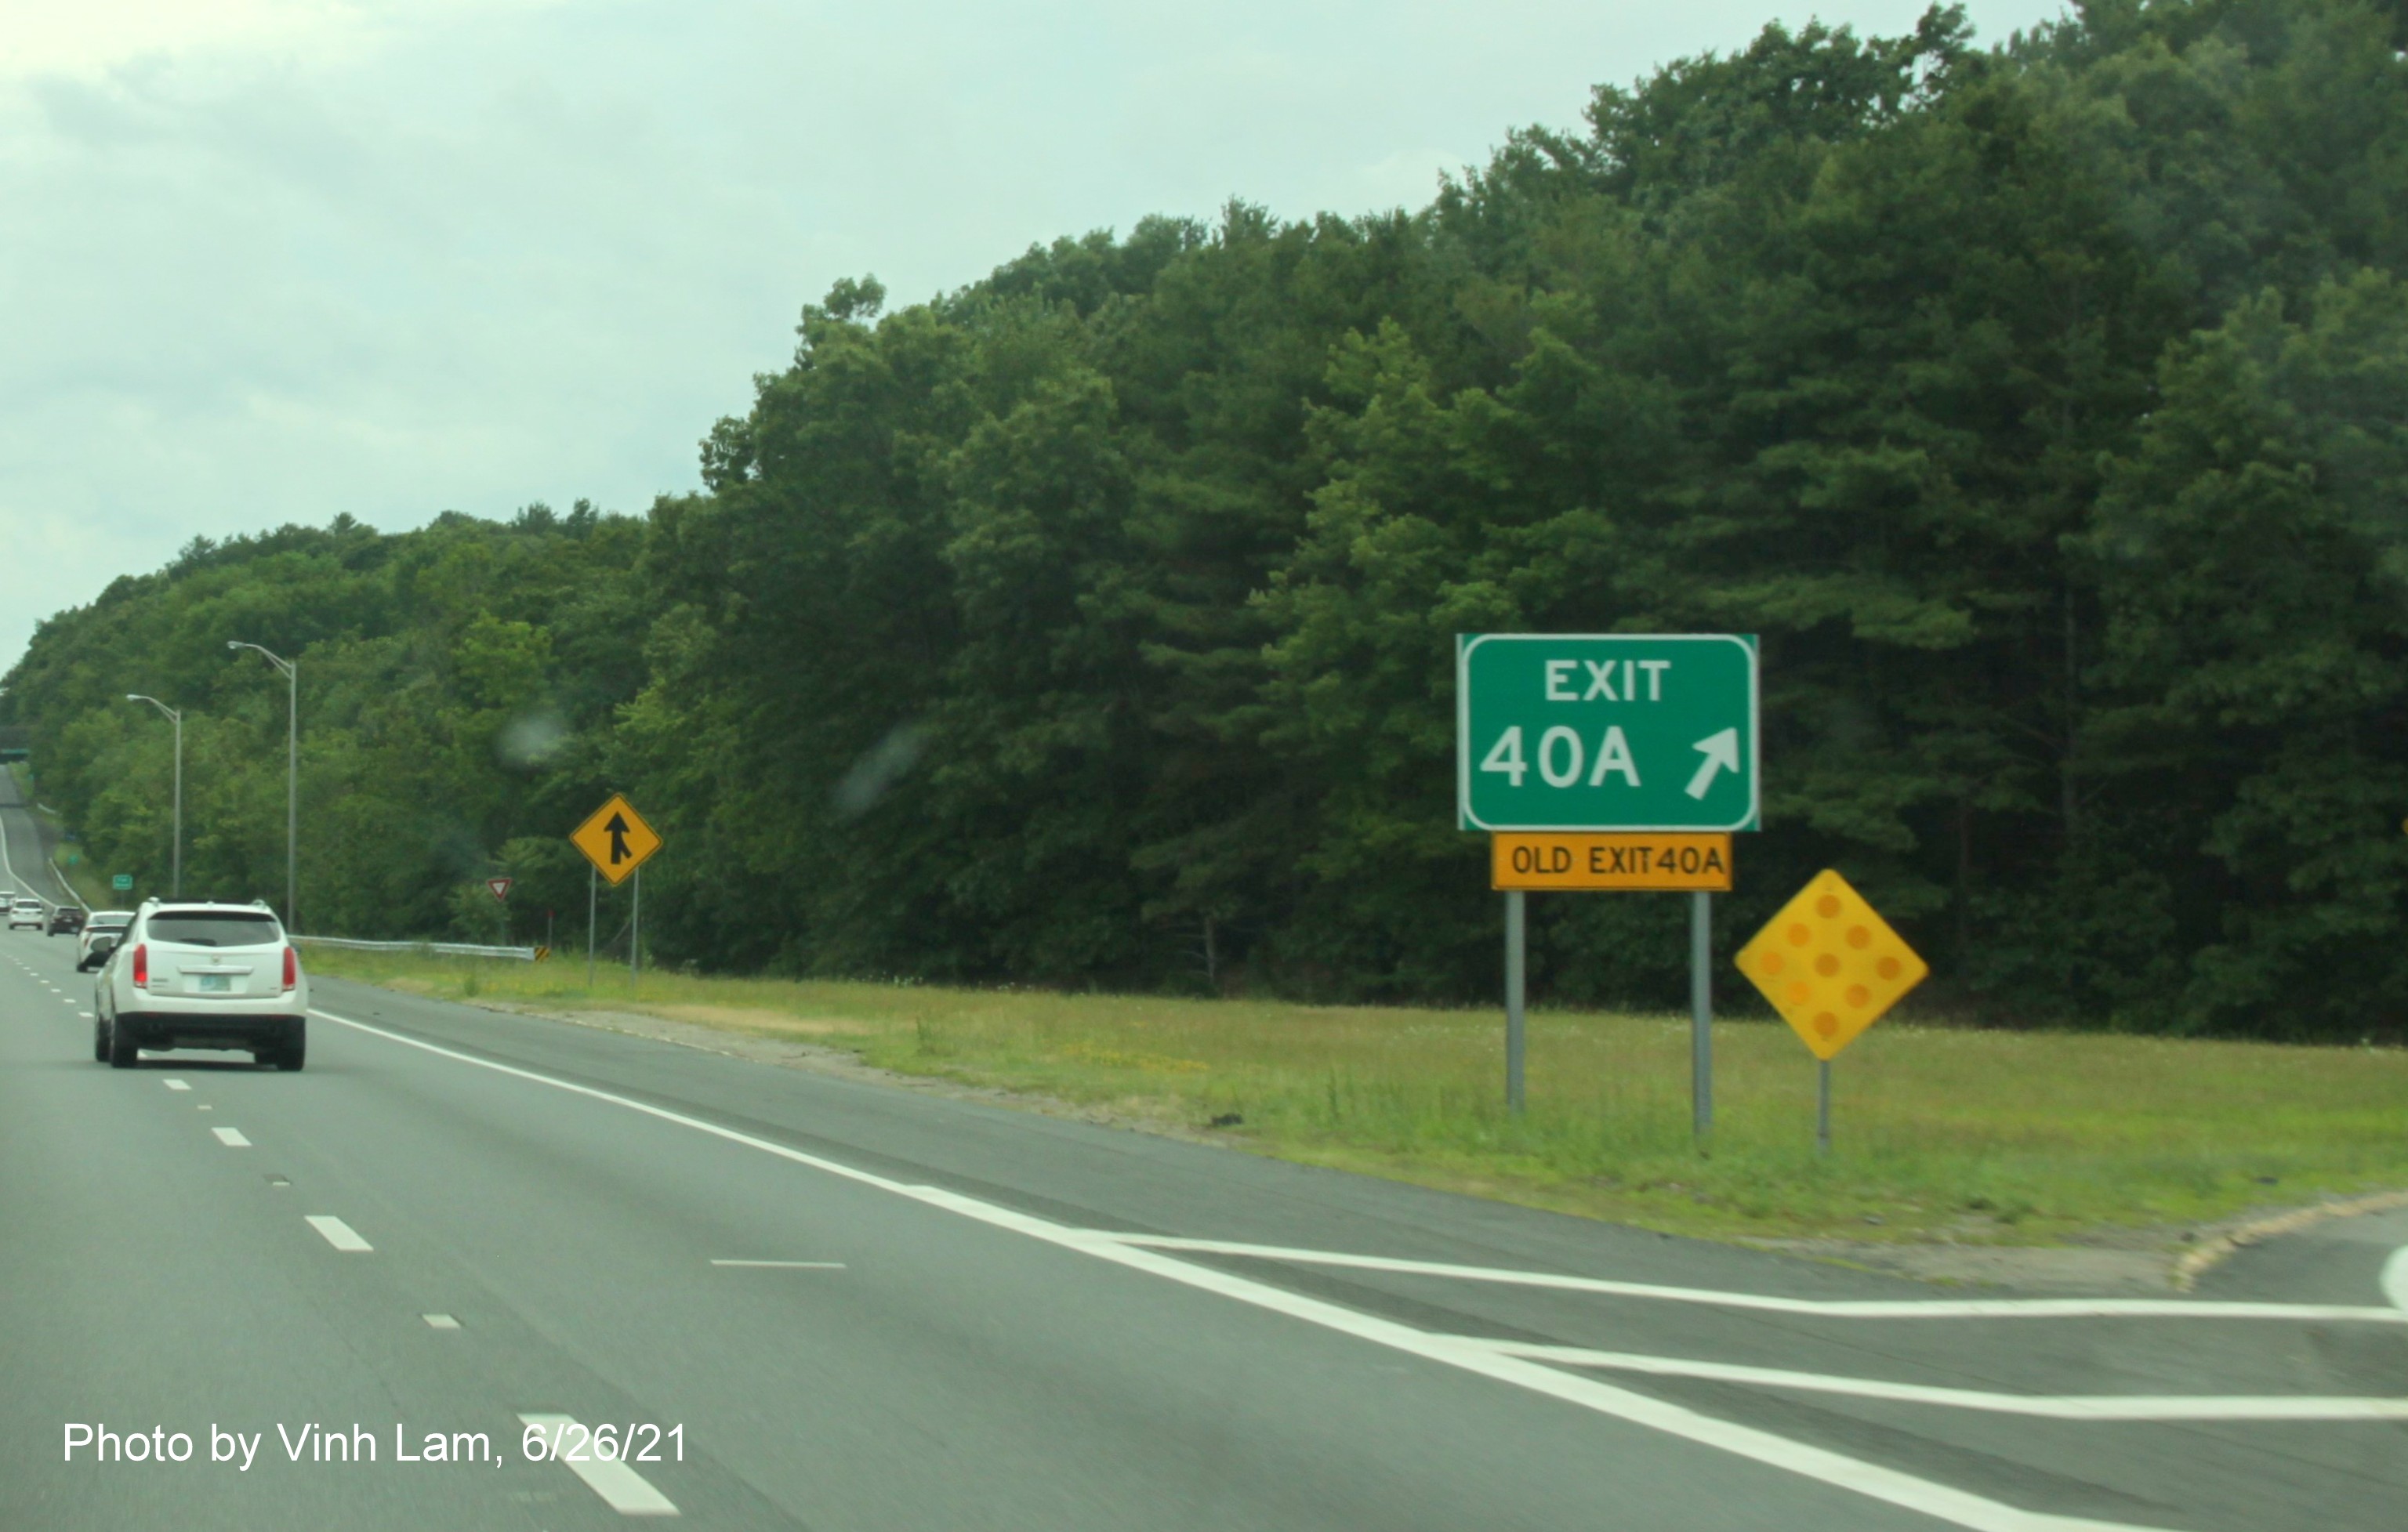 Image of gore sign for I-93 South exit with old sequential exit number and yellow Old Exit 40A sign attached below on I-495 South in Andover, by Vinh Lam, June 2021